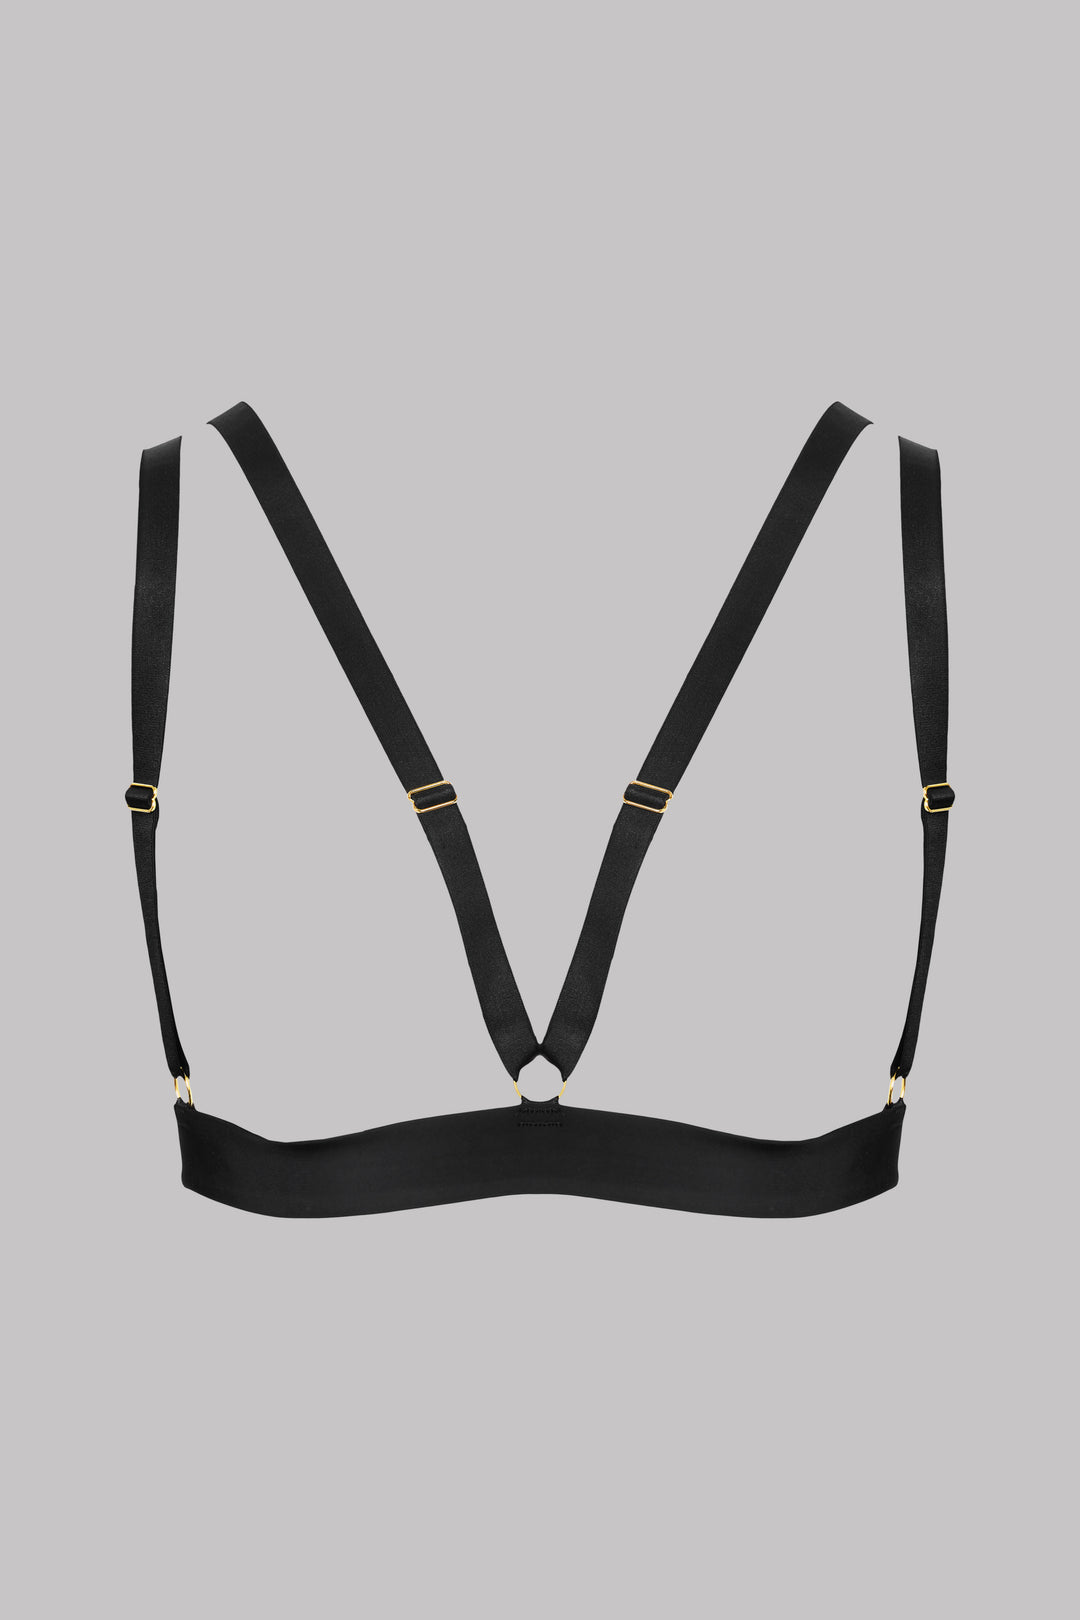 Maison Close Tapage Nocturne Harness - TrousseauOfDallas